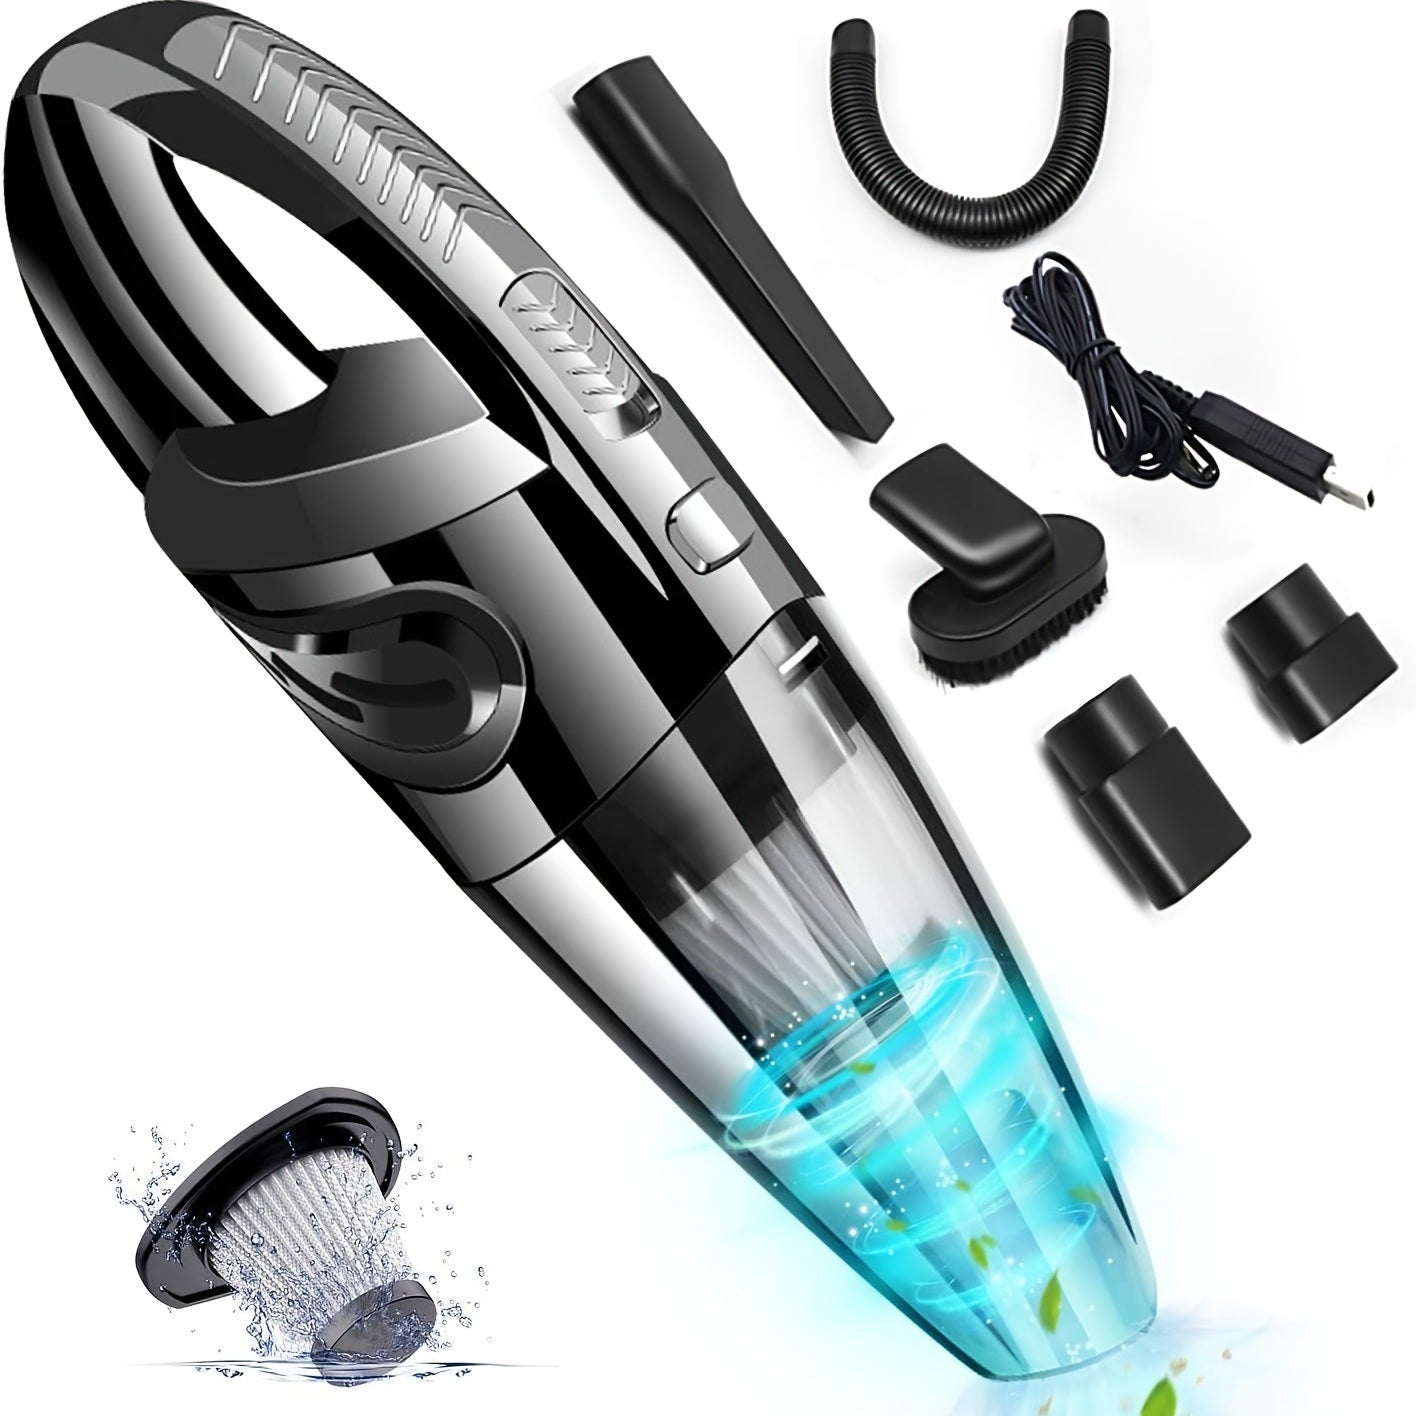 A Cordless Rechargeable Lightweight Portable Mini Hand Vac With Powerful Cyclonic Suction For Wet Dry Car Pet Hair Home Use with various attachments displayed, showcasing its versatility and wet-dry cleaning capability.